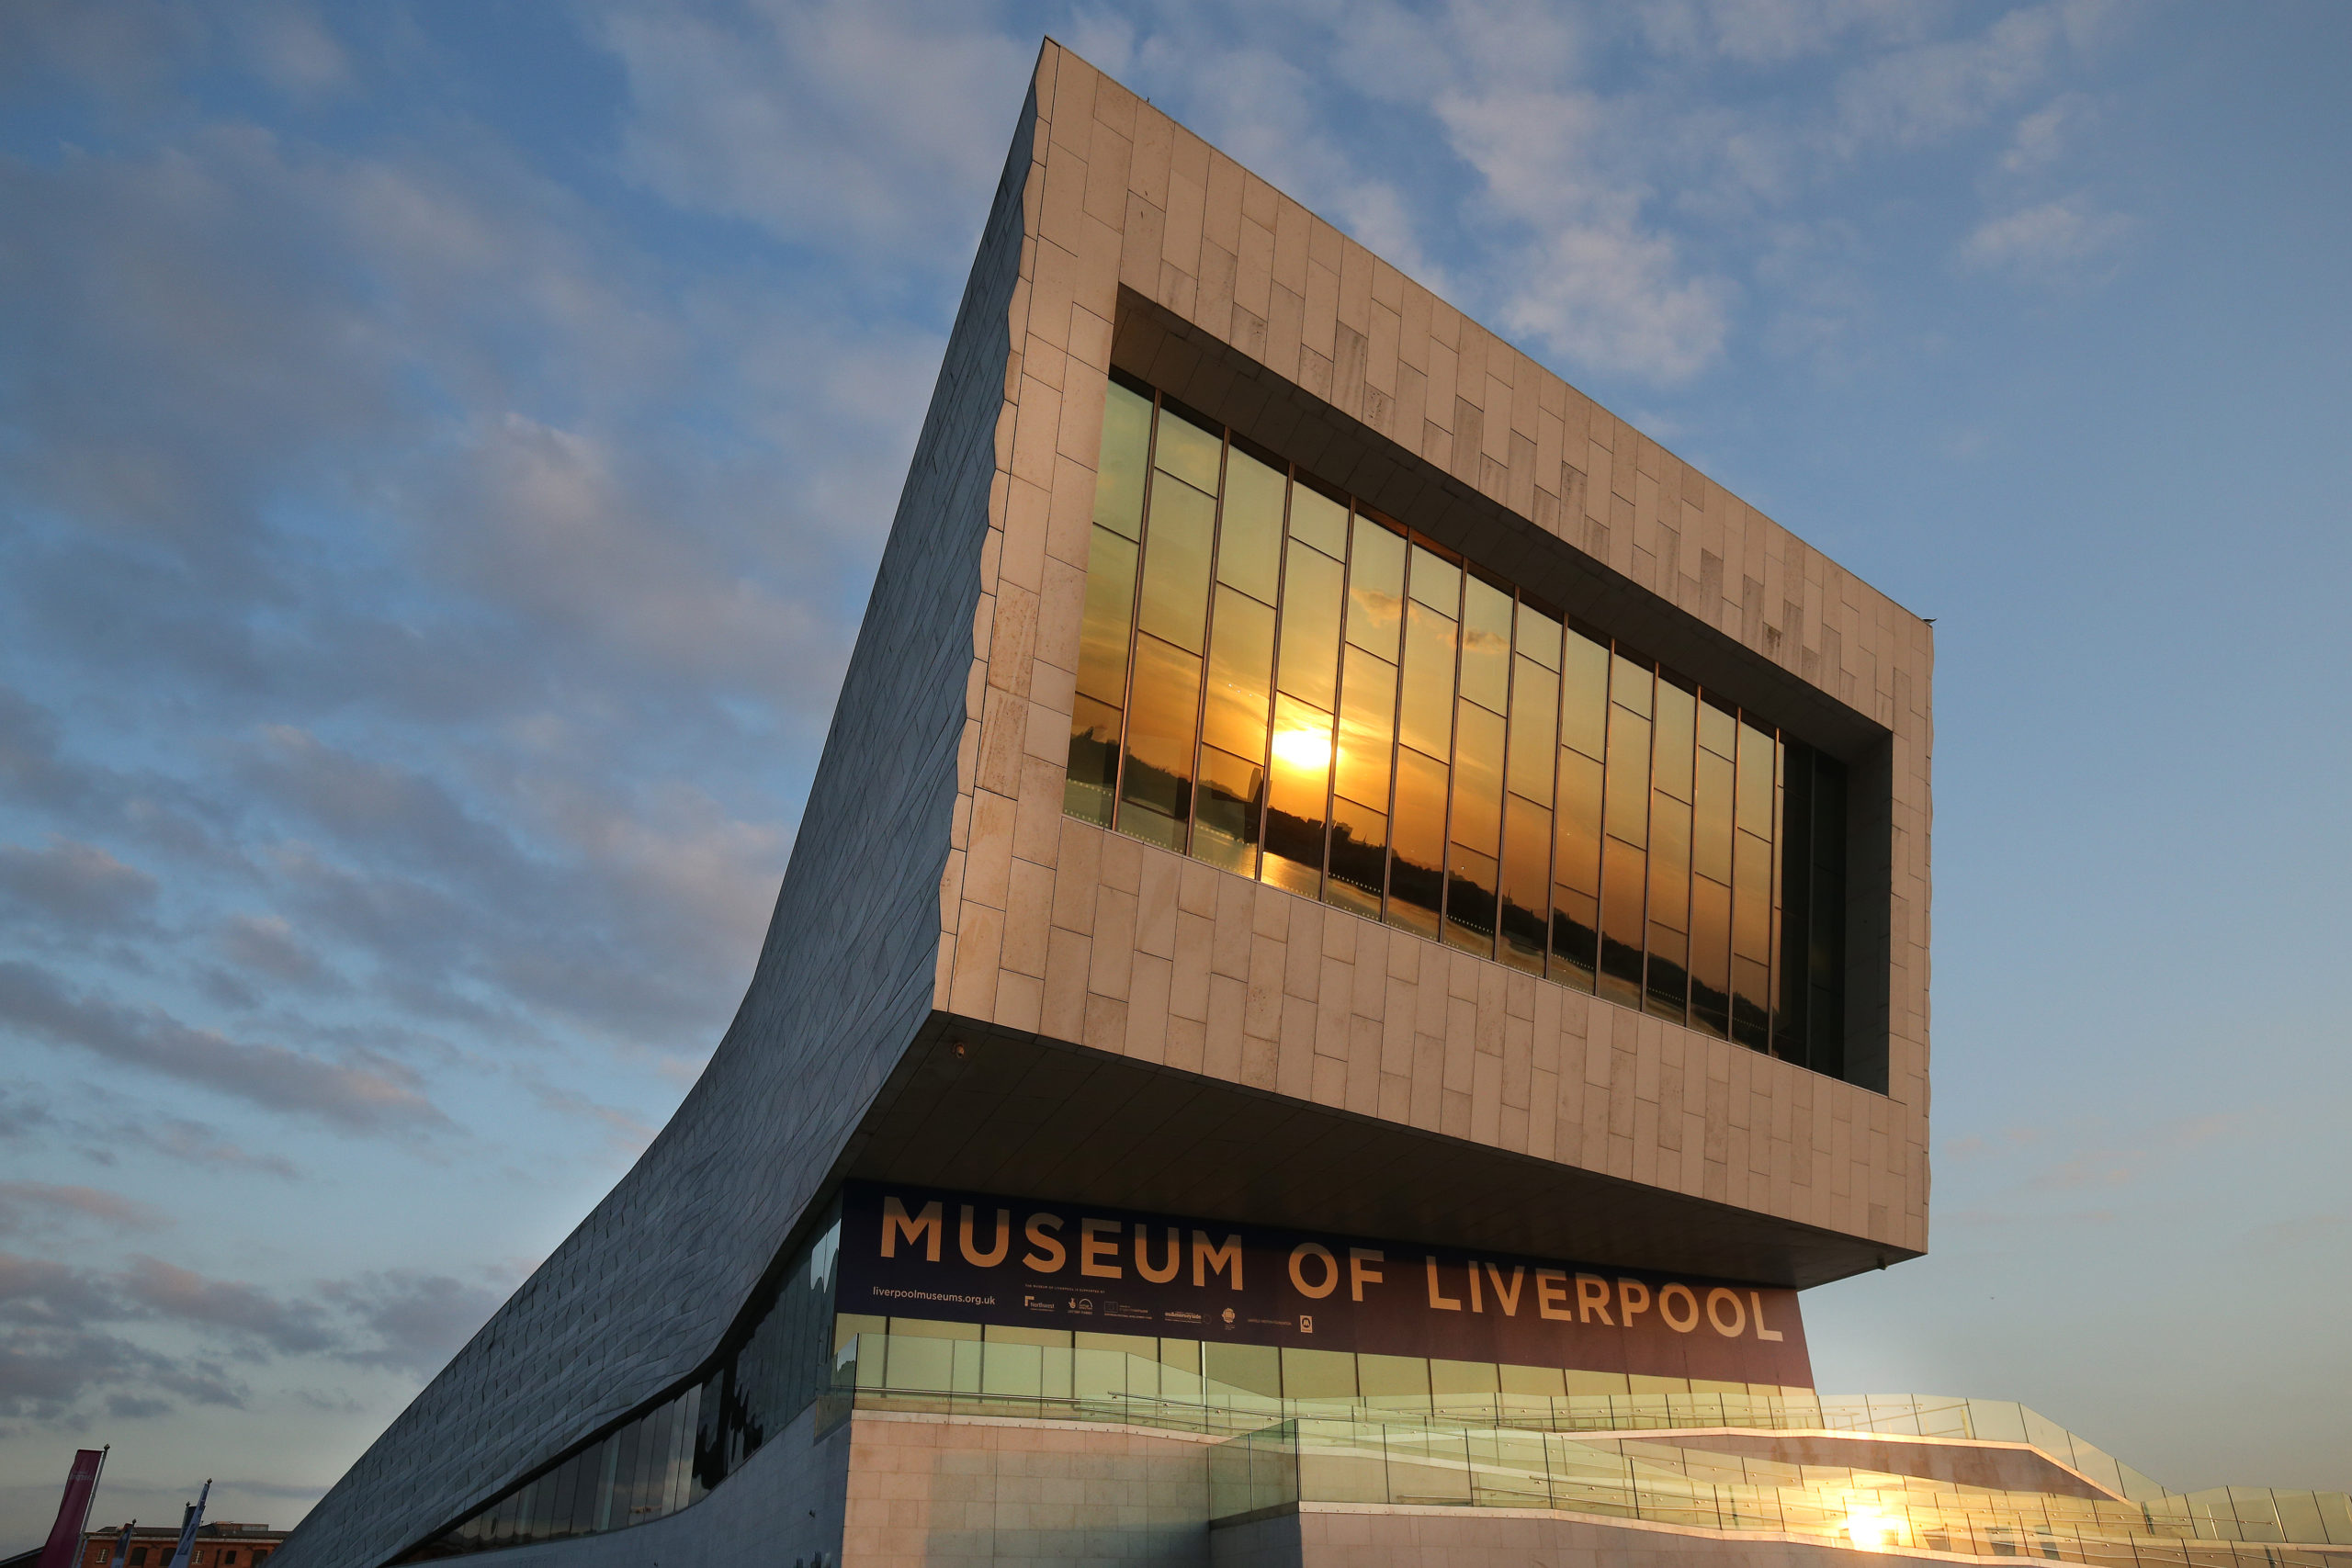 The Museum of Liverpool building at sunset.